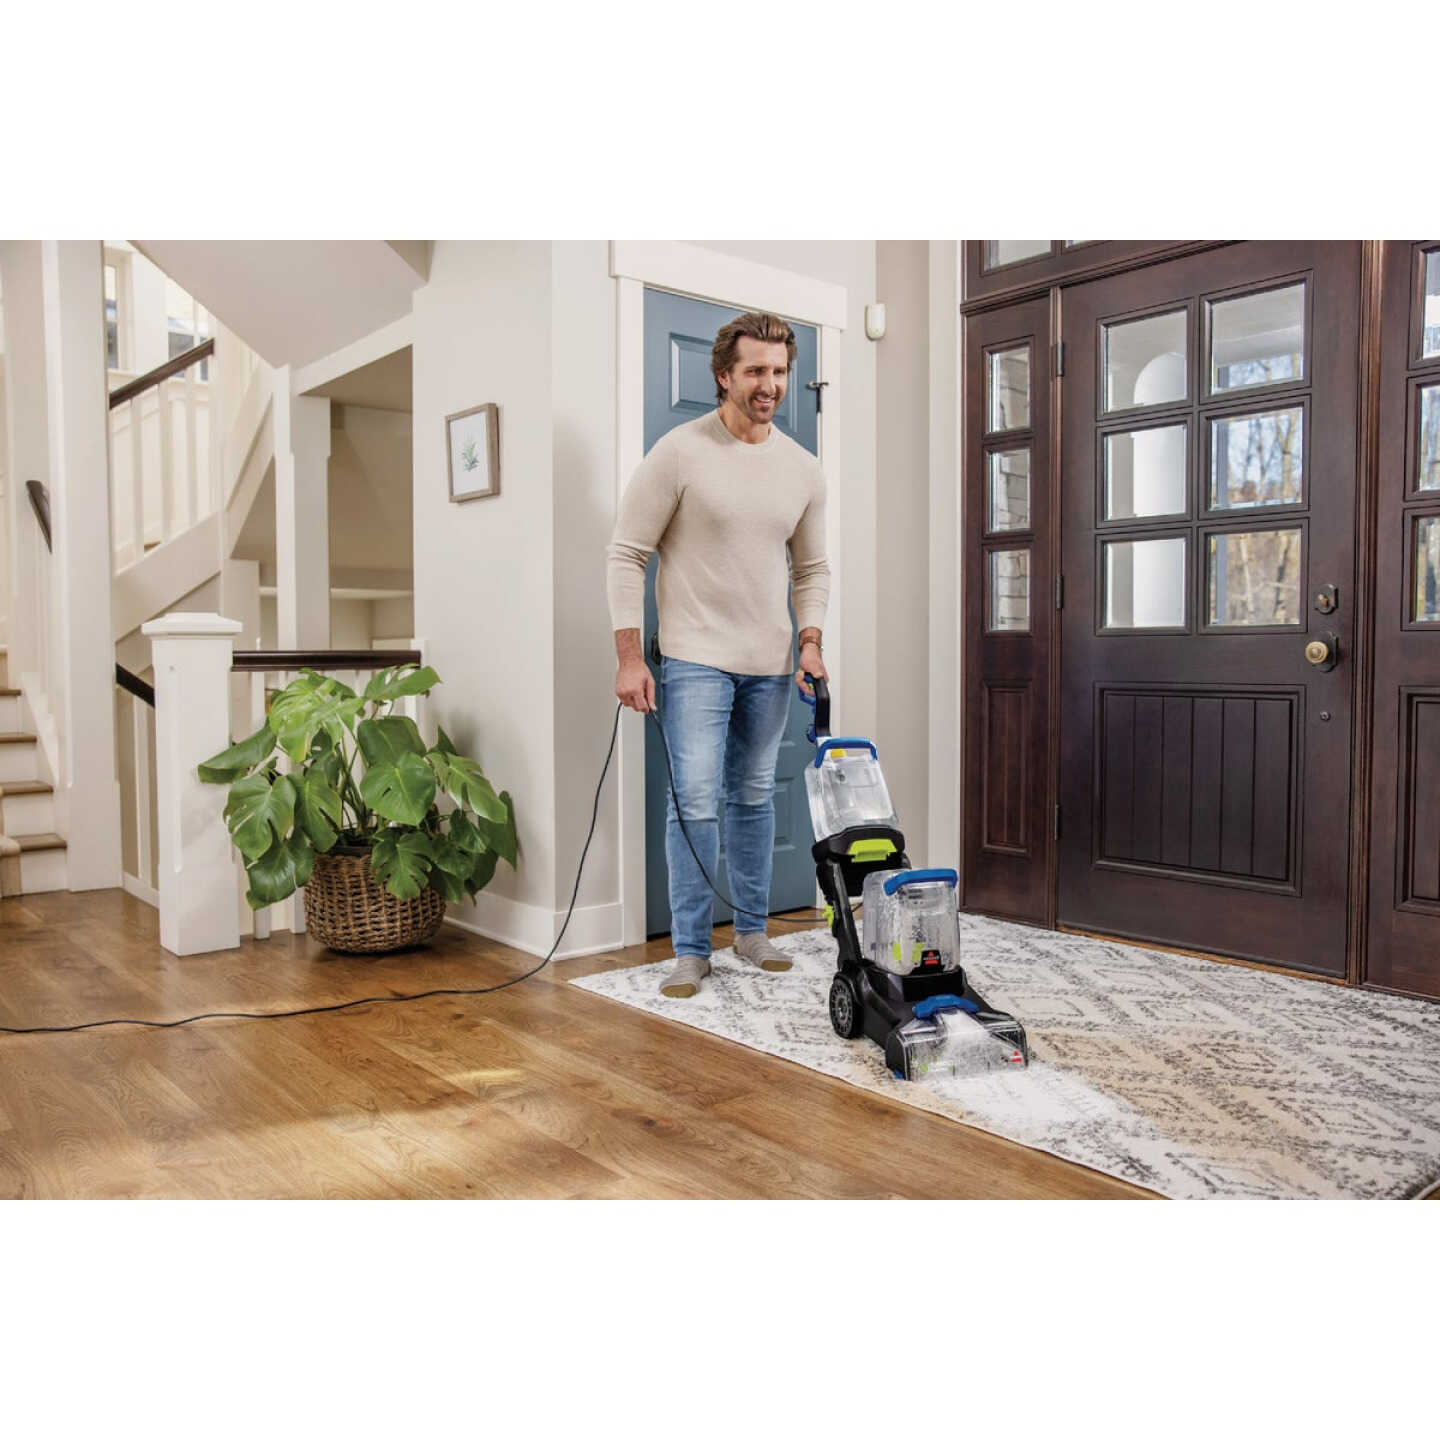 BISSELL TurboClean DualPro Pet Carpet Cleaner in the Carpet